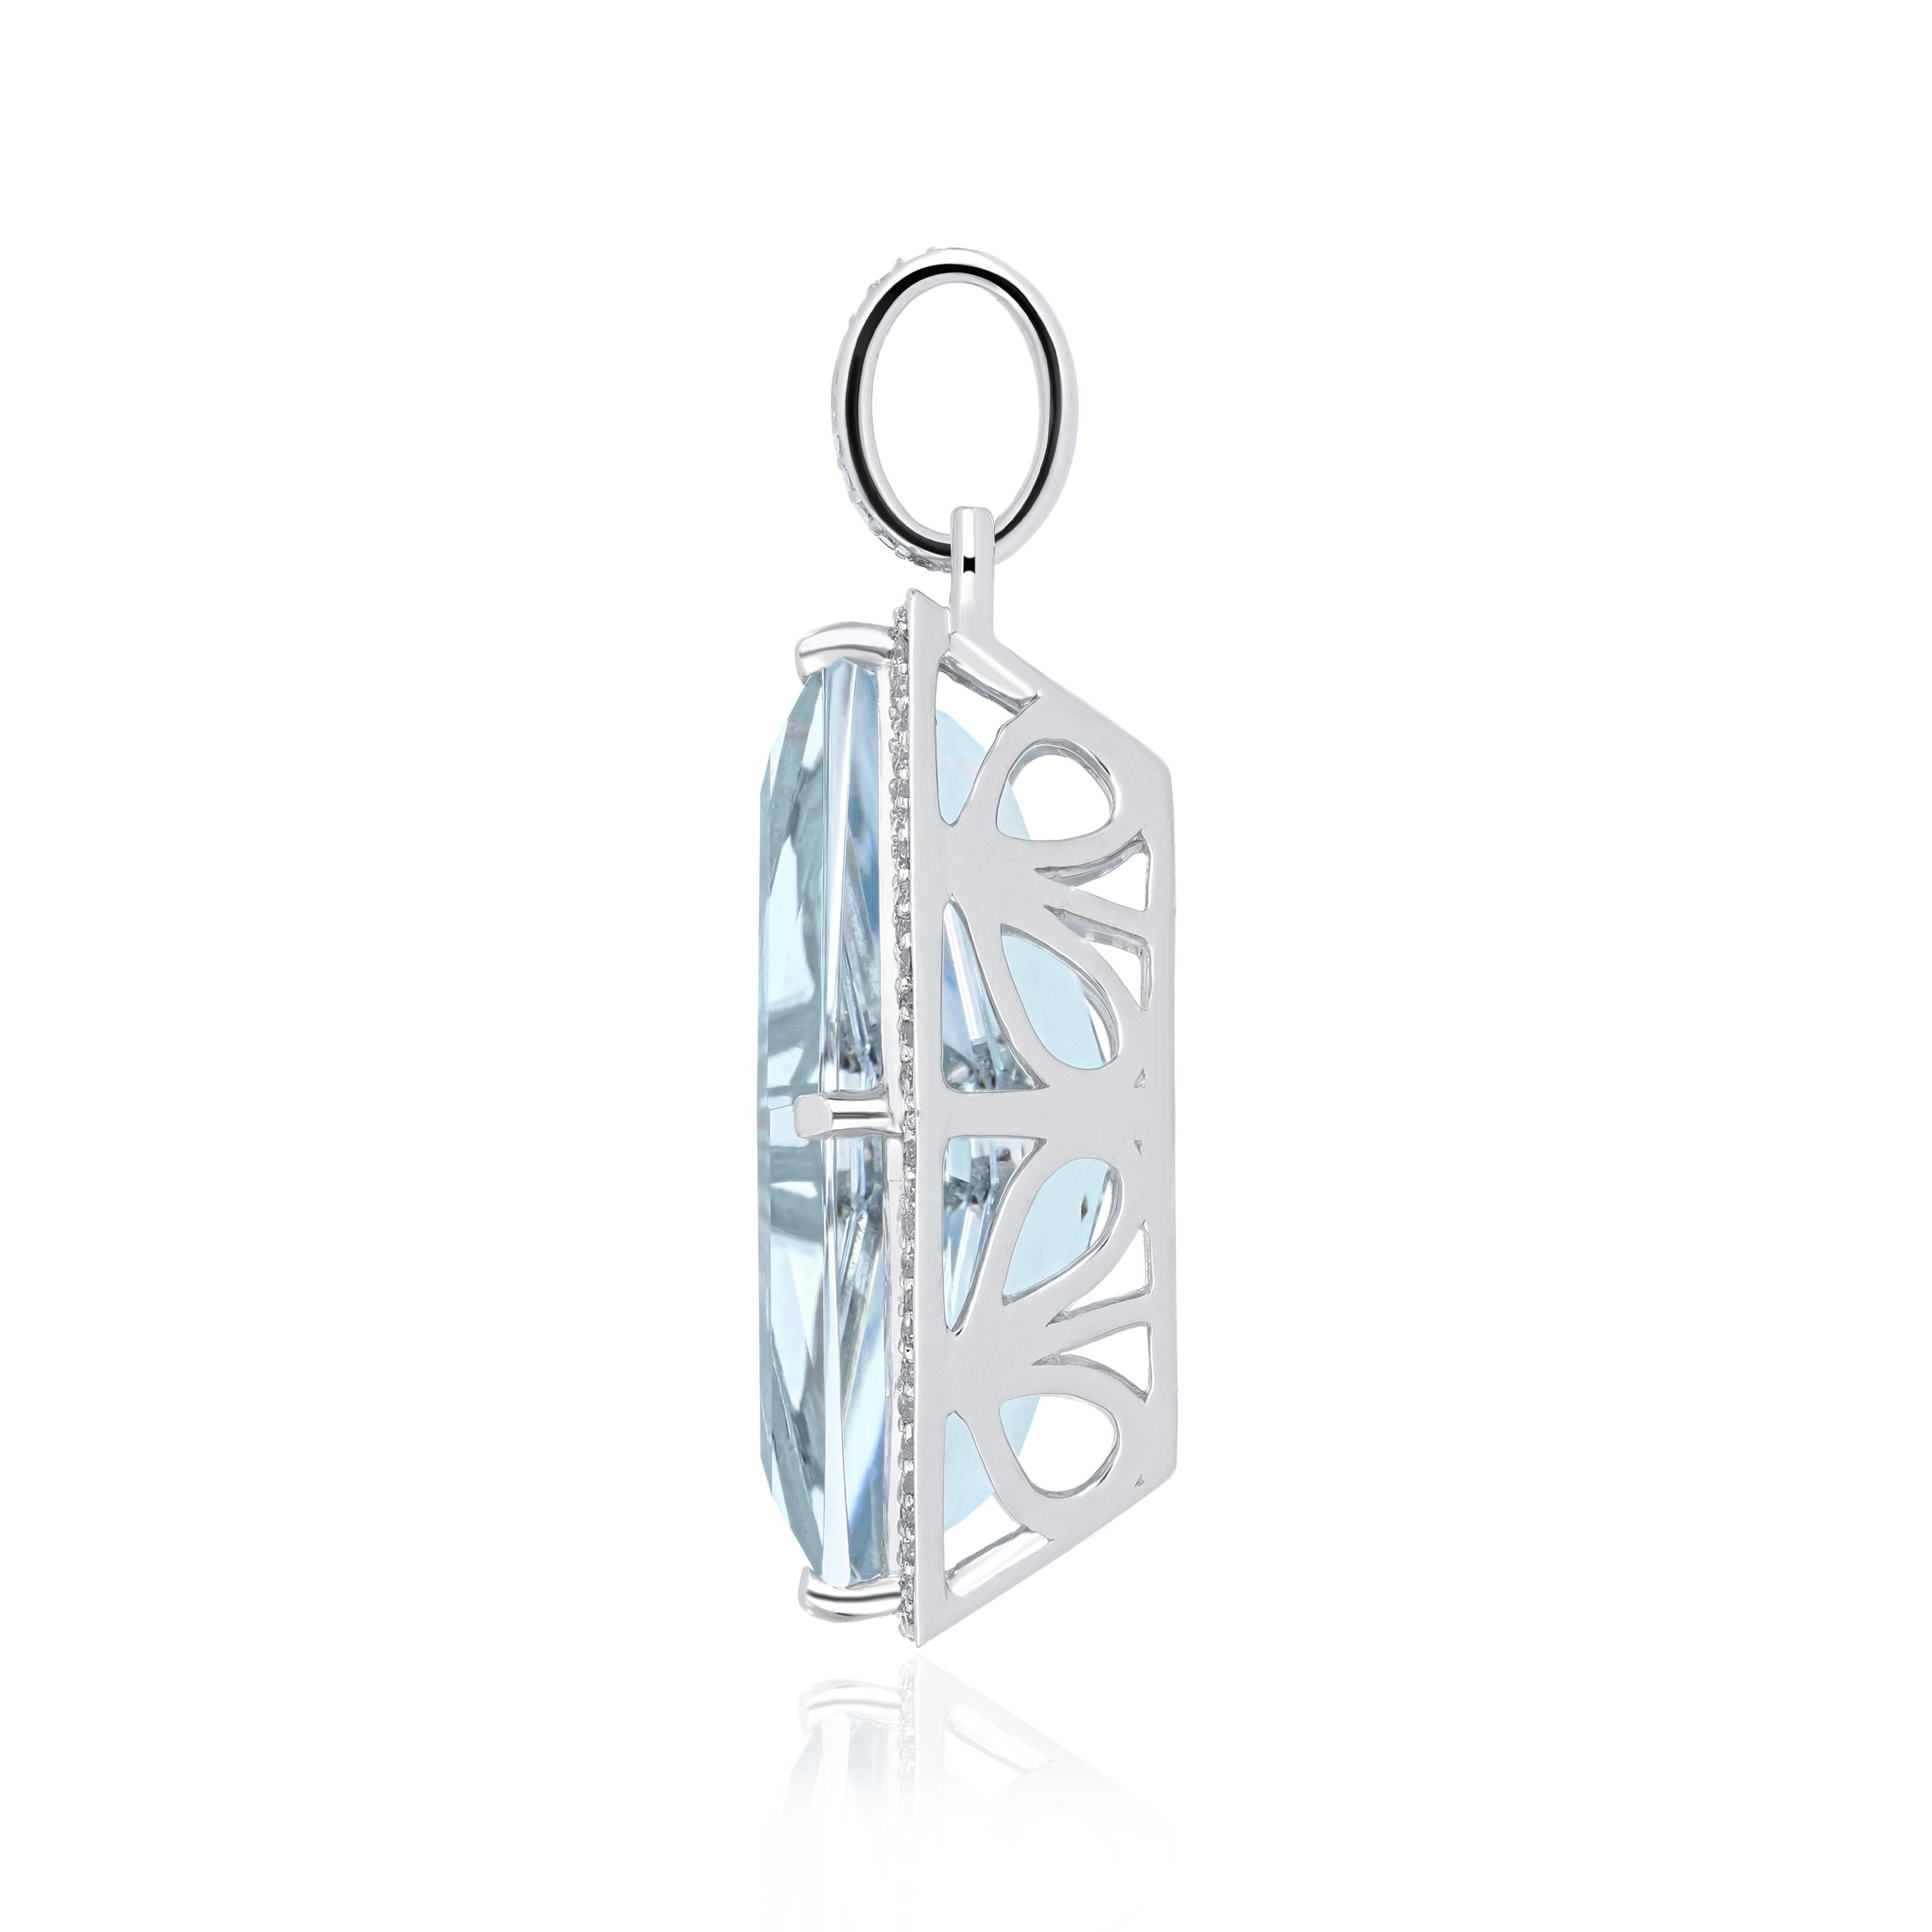 Elegant and exquisitely detailed 14 Karat White Gold Pendant, center set with Aquamarine Hexagon Shape with (approx.) 11.70Cts. Diamond Brilliant Round Shape with (approx.)0.21Cts Beautifully Hand crafted in 14 Karat White Gold.

Stone